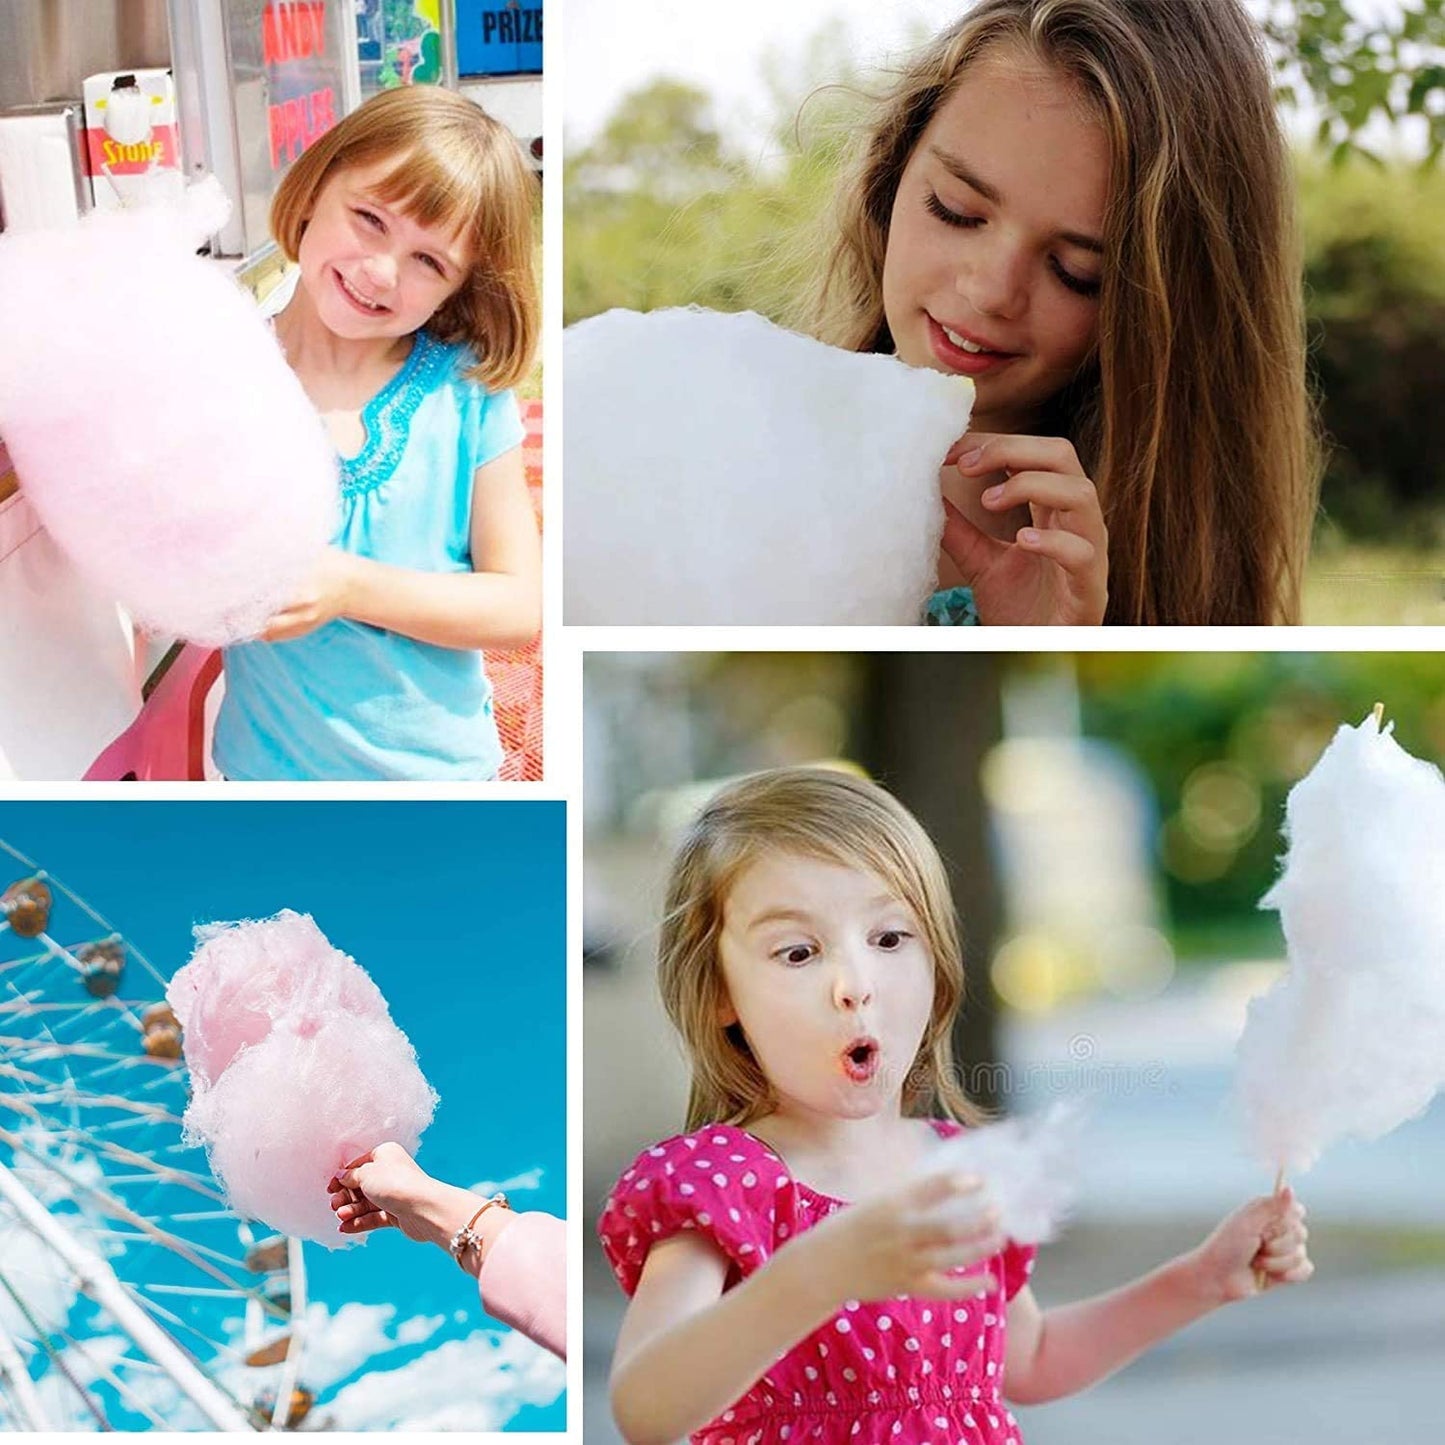 AICOOK | Cotton Candy Machine, Nostalgia Candy Floss Maker, Includes Sugar Scoop and 10 Cones, Childhood Memory, Red